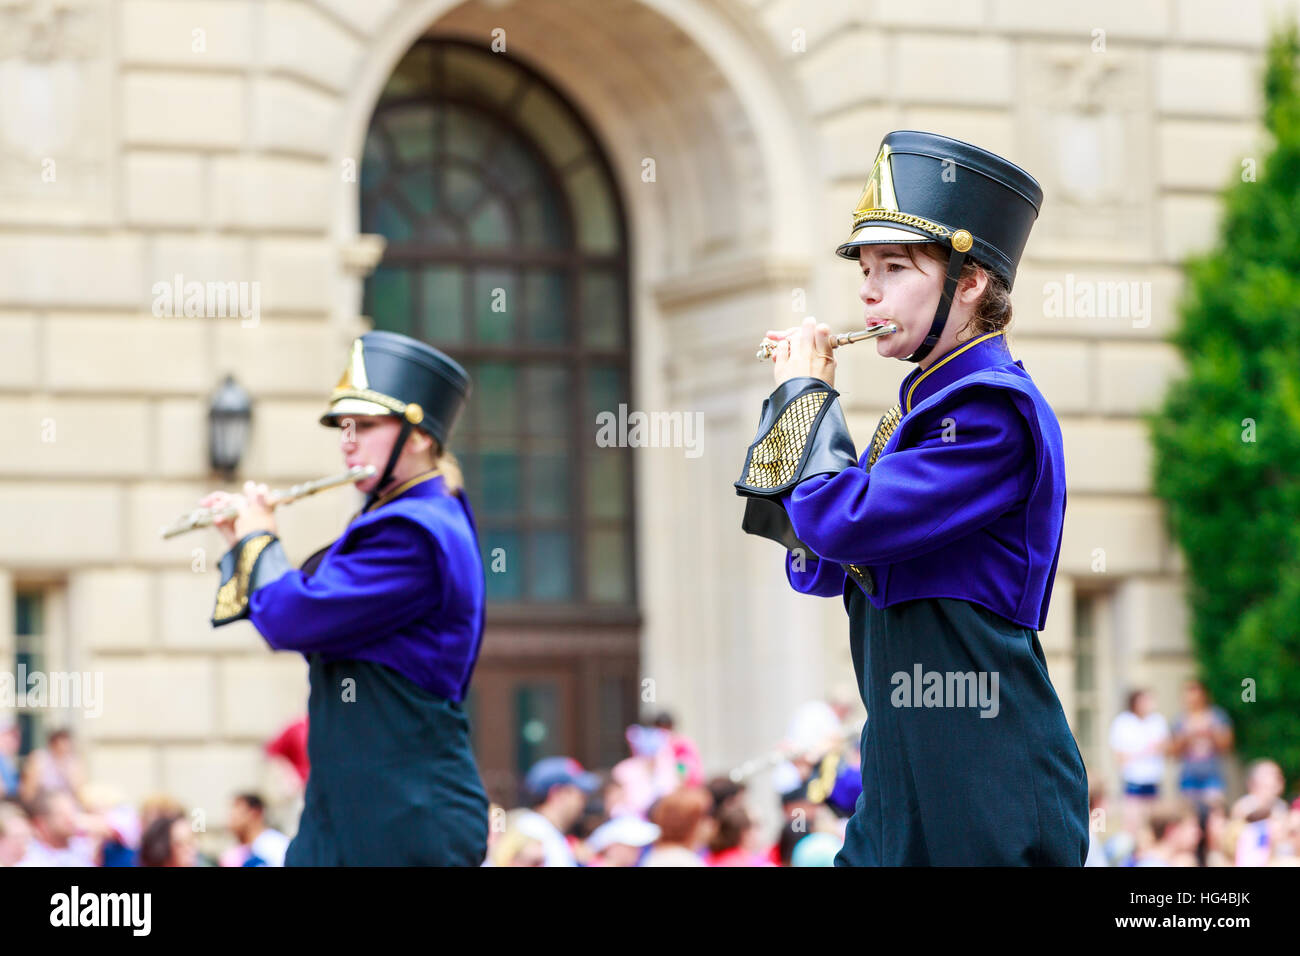 Washington, D.C., USA - July 4, 2015: Taylorville High School Tornado Marching Band in the annual National Independence Day Parade 2015. Stock Photo